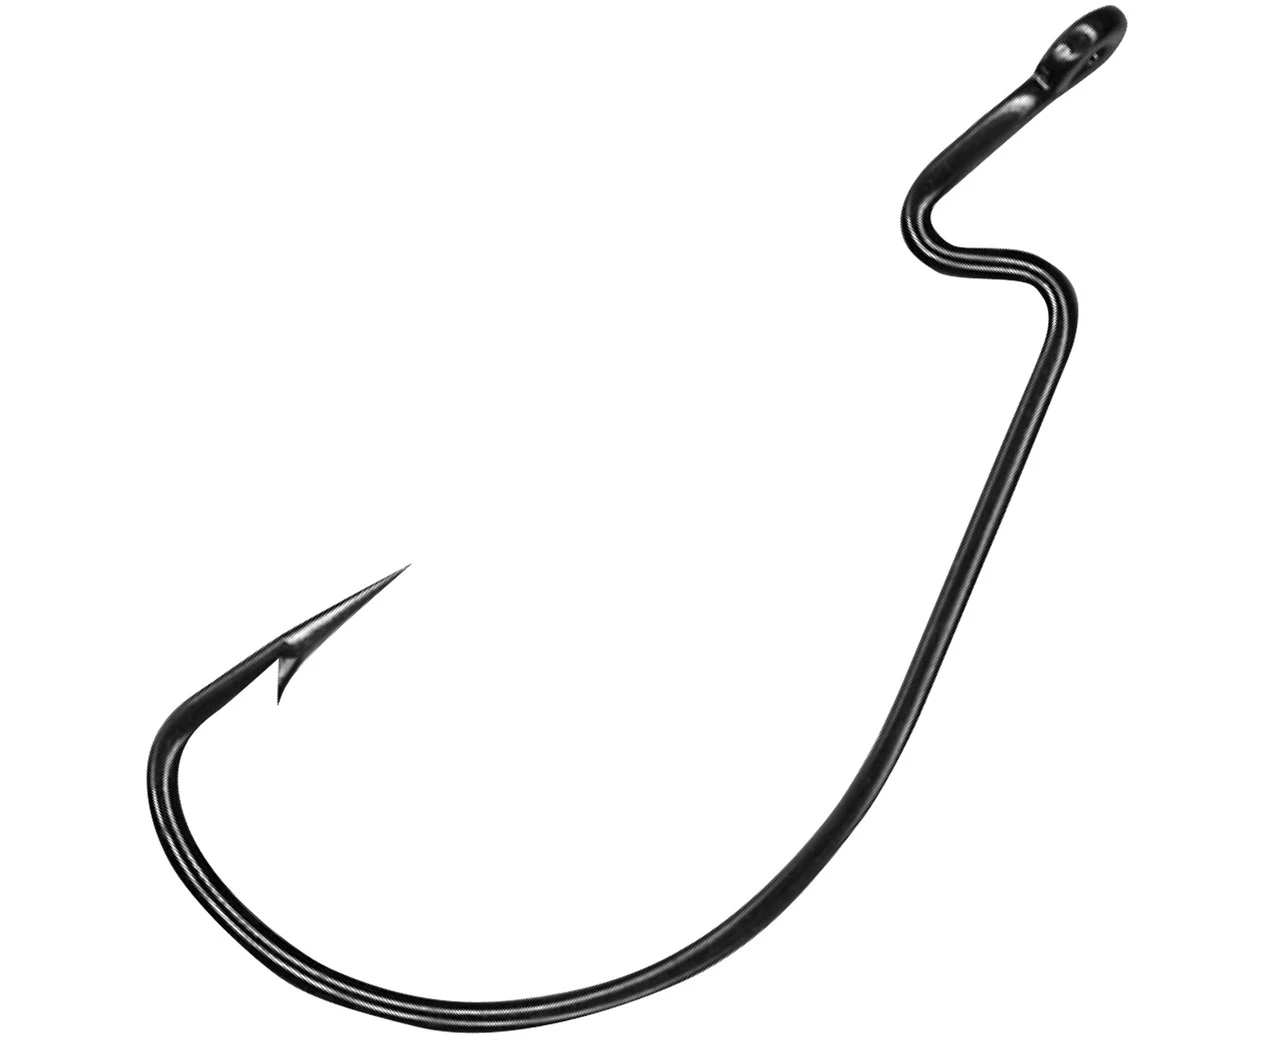 Mustad Size 2 Fine Worm 2 Hook Whiting Fishing Rig 2 Pk